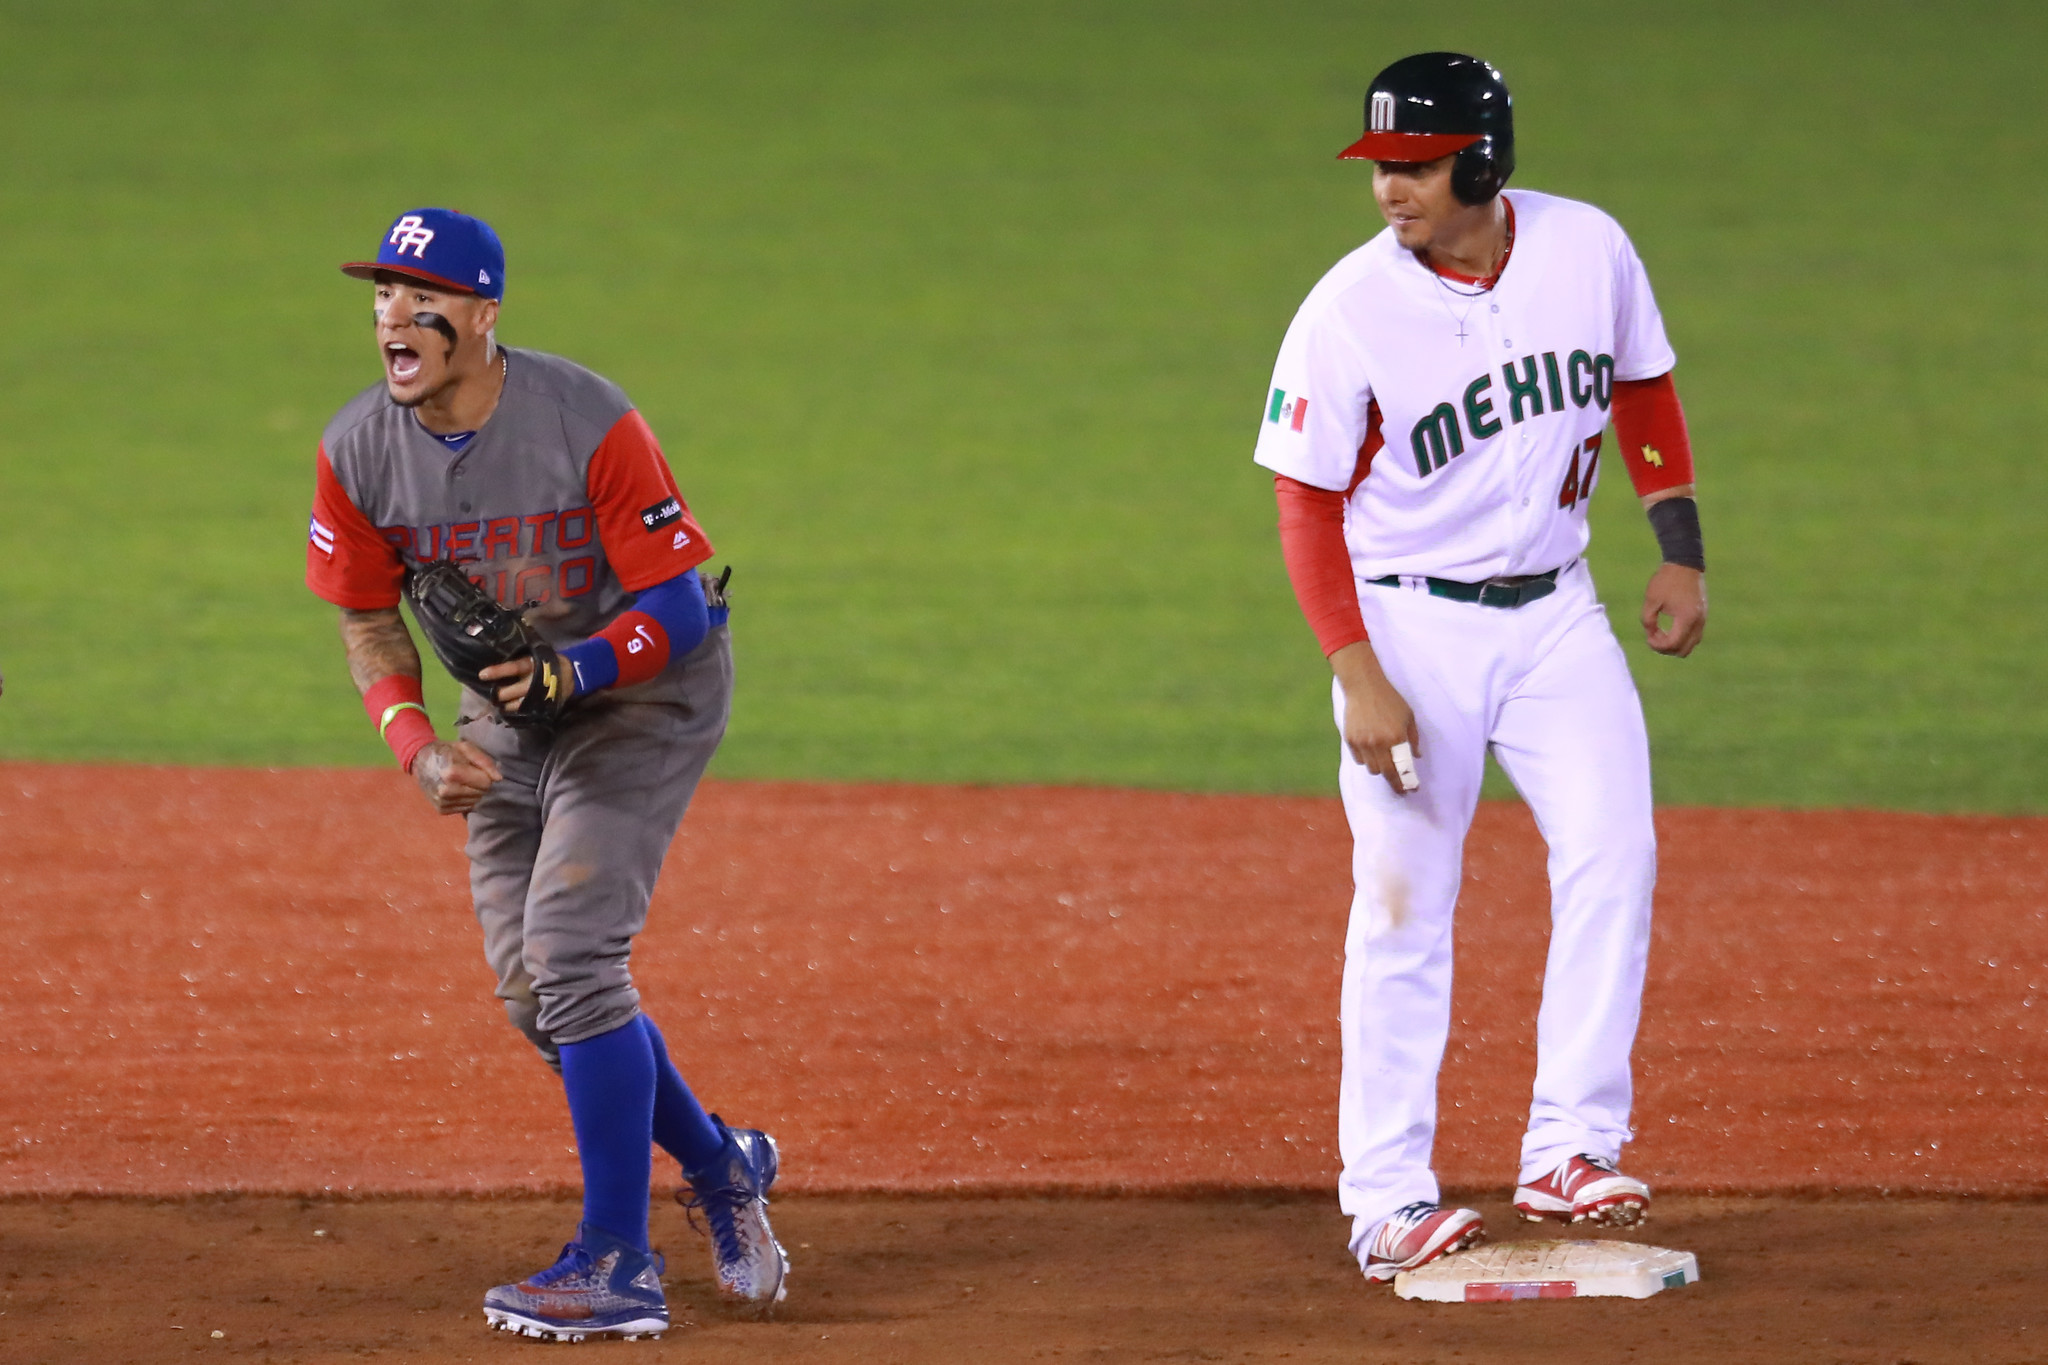 Cubs' Javier Baez vaults Puerto Rico to 2-0 in WBC play - Baseball - C...